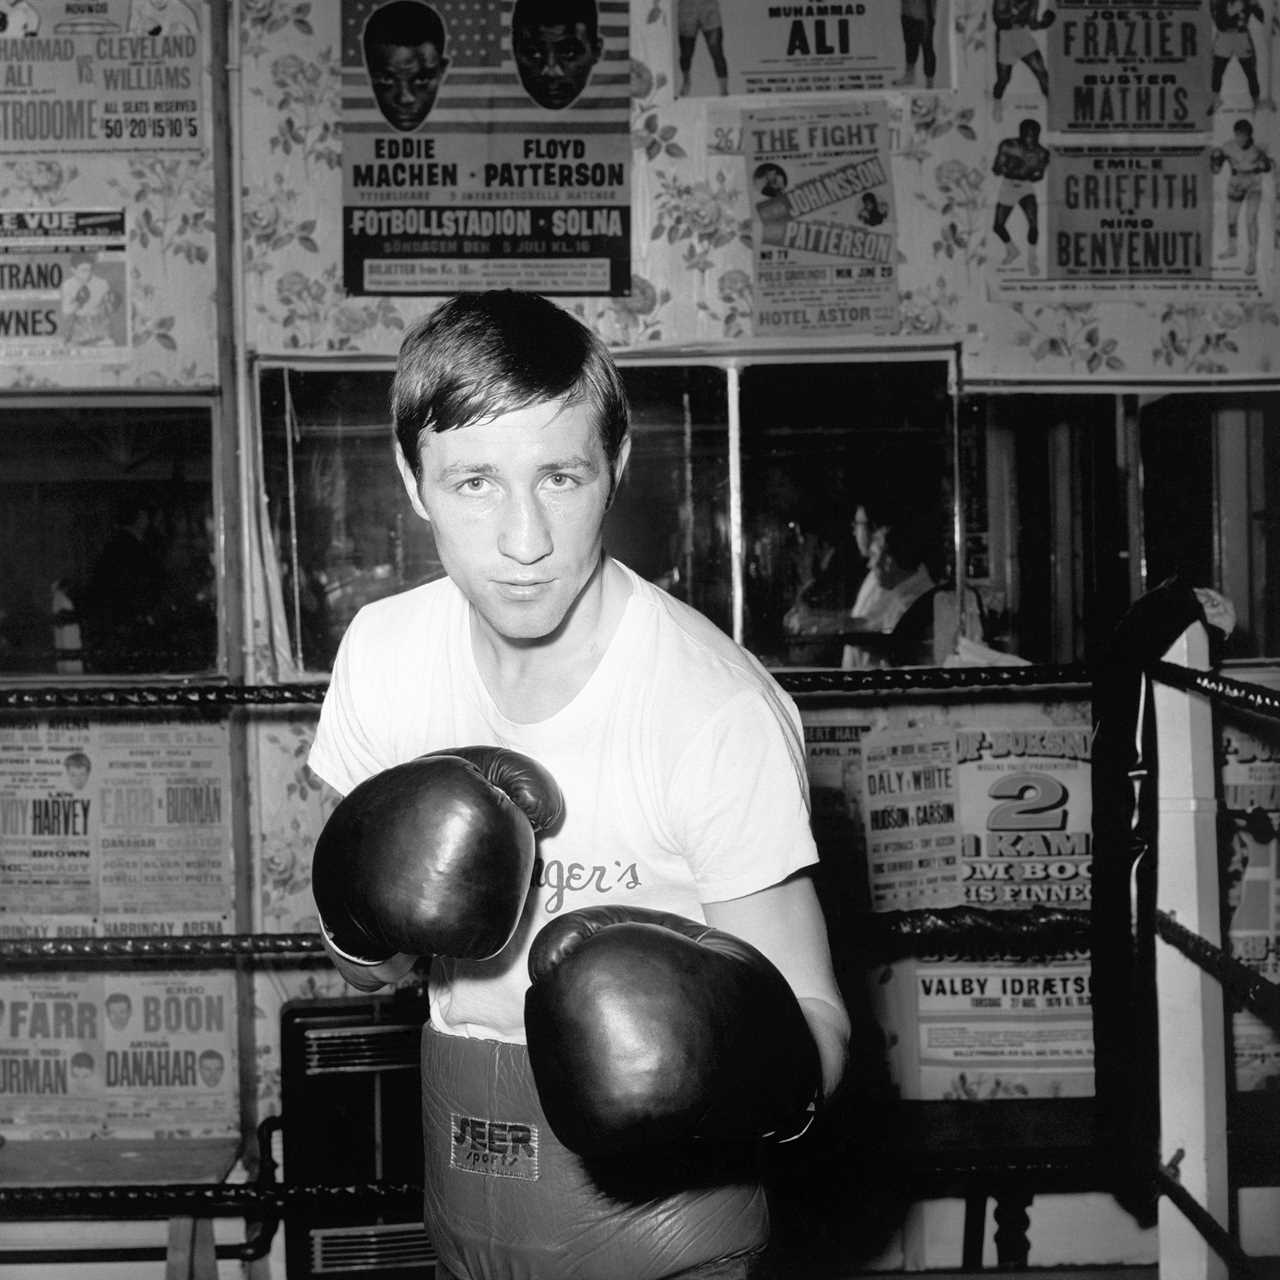 Ken Buchanan, 77, has died. Former champion of the lightweight world is gone. Boxing world grieves.